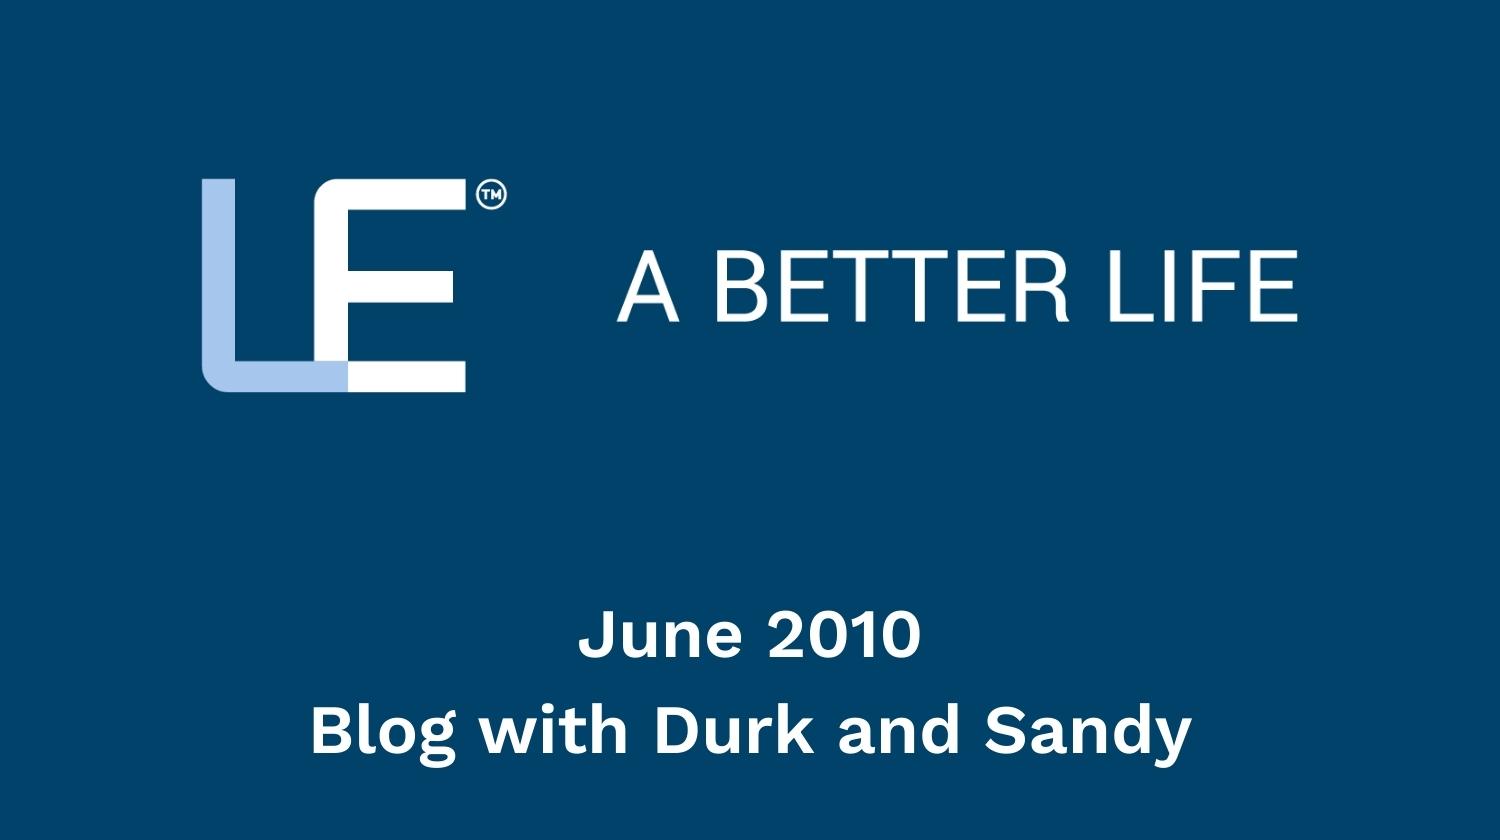 June 2010 Blog with Durk and Sandy